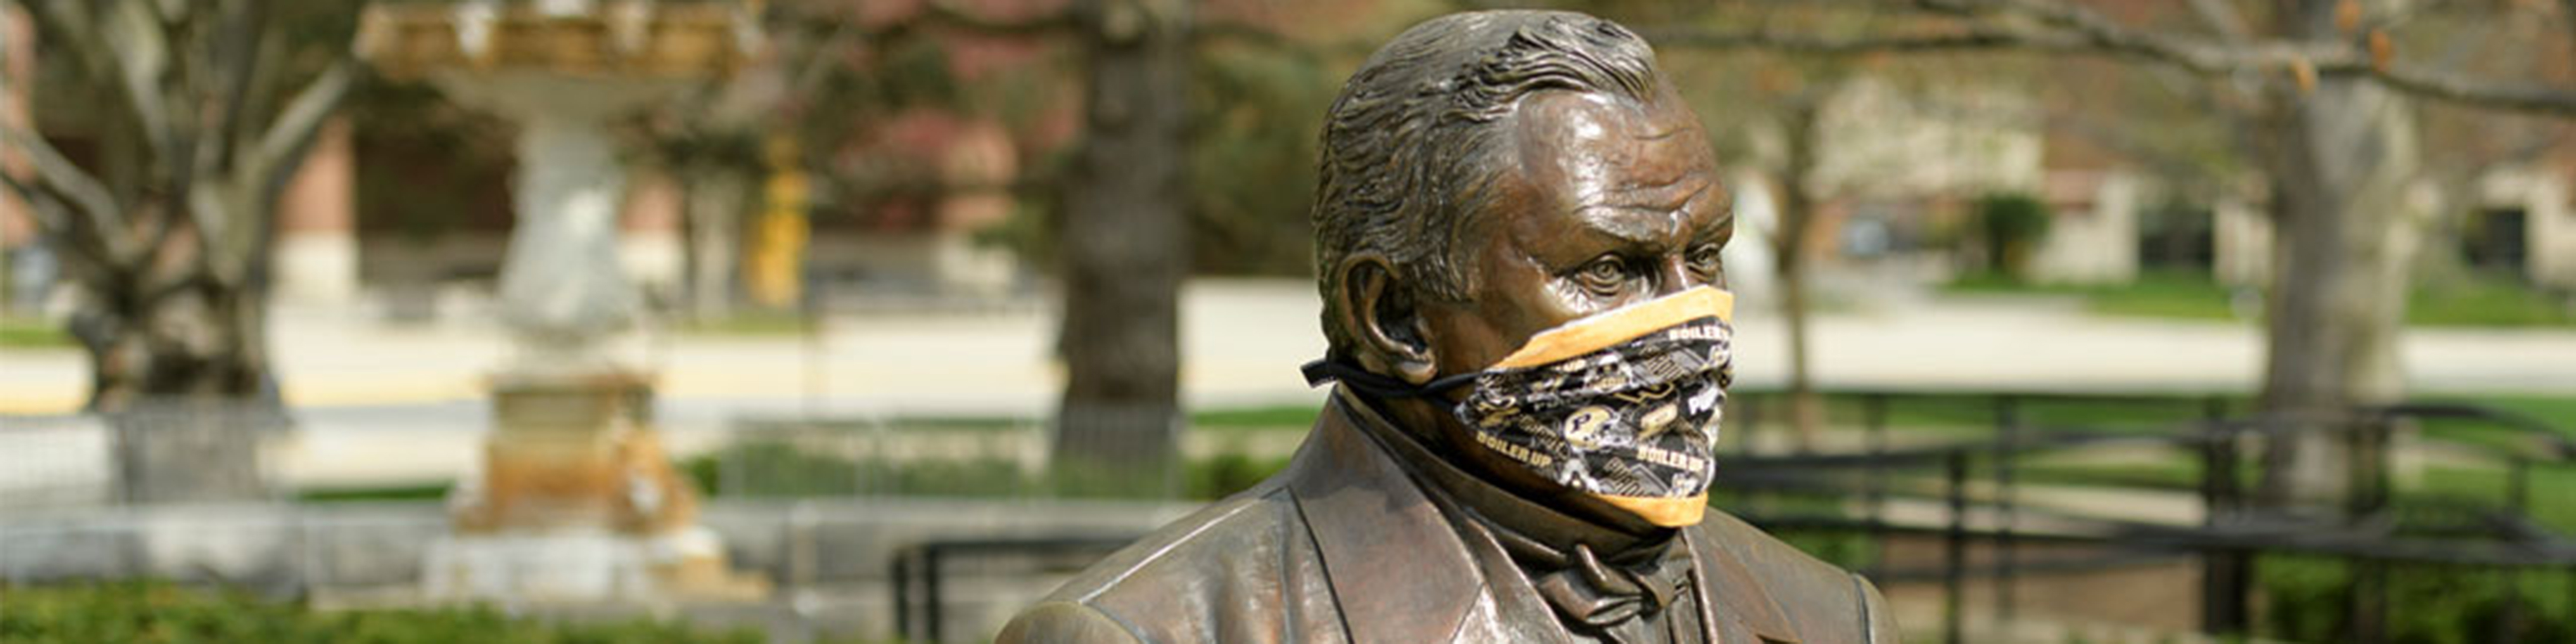 Photograph of a bronze statue on the campus of Perdue university with a Perdue facemask around his face